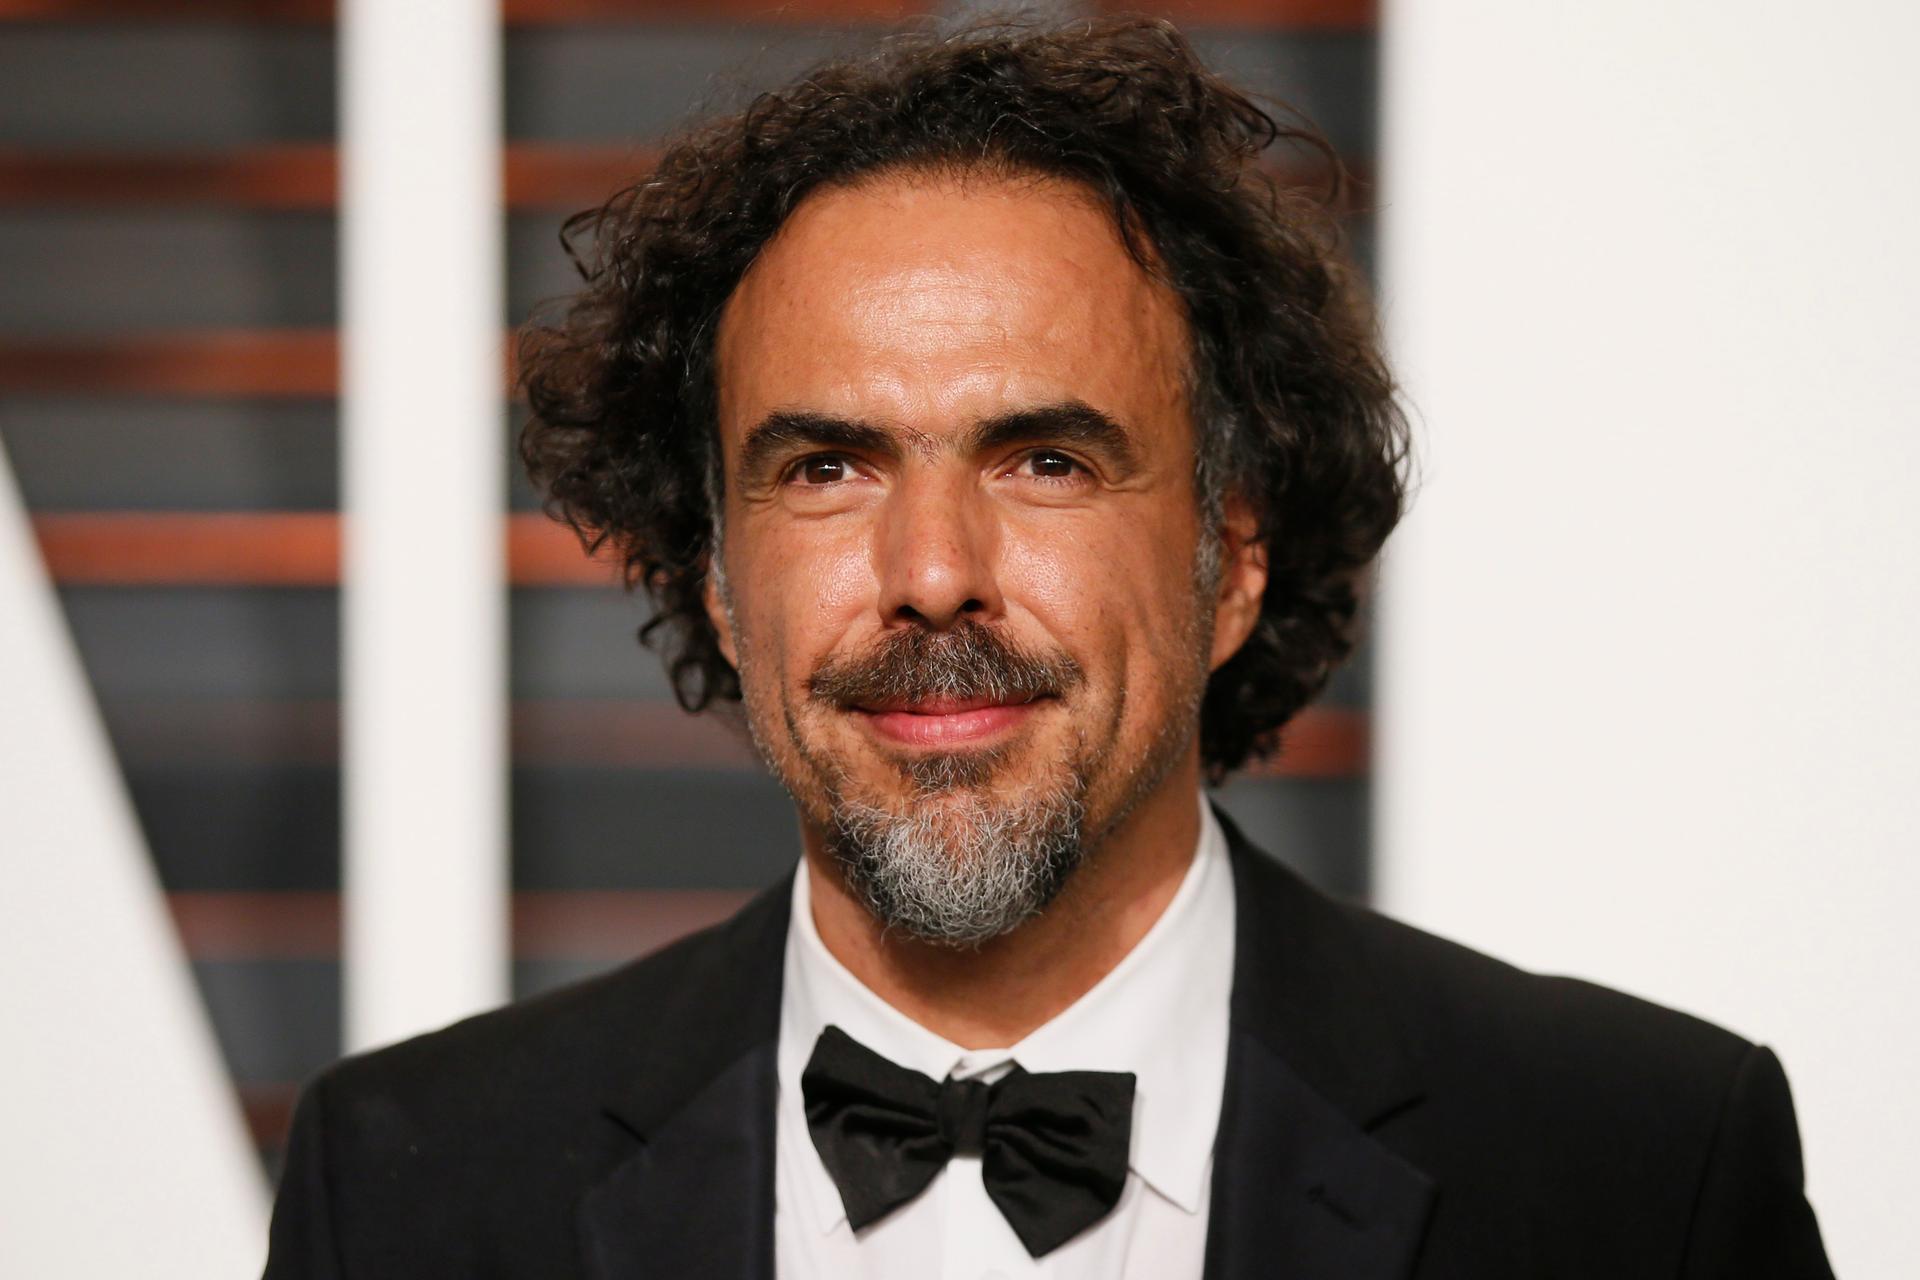 Alejandro González Iñárritu’s wins at the Oscars marked the first time the night’s two biggest awards — for Best Director and Best Film — went to a Mexican-born filmmaker.